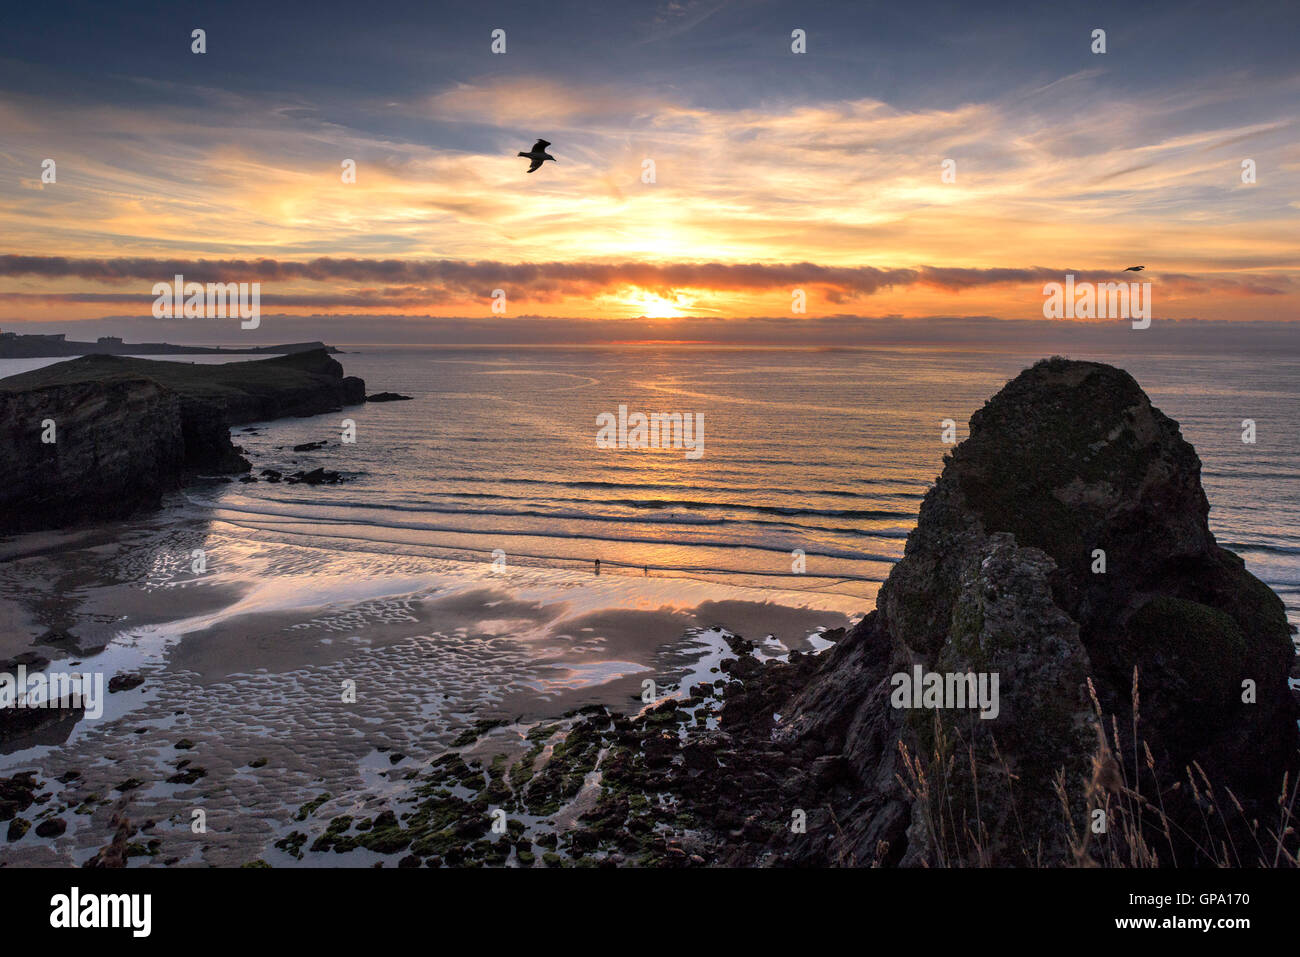 A spectacular sunset breaks over Whipsiderry Beach in Newquay, Cornwall. Stock Photo